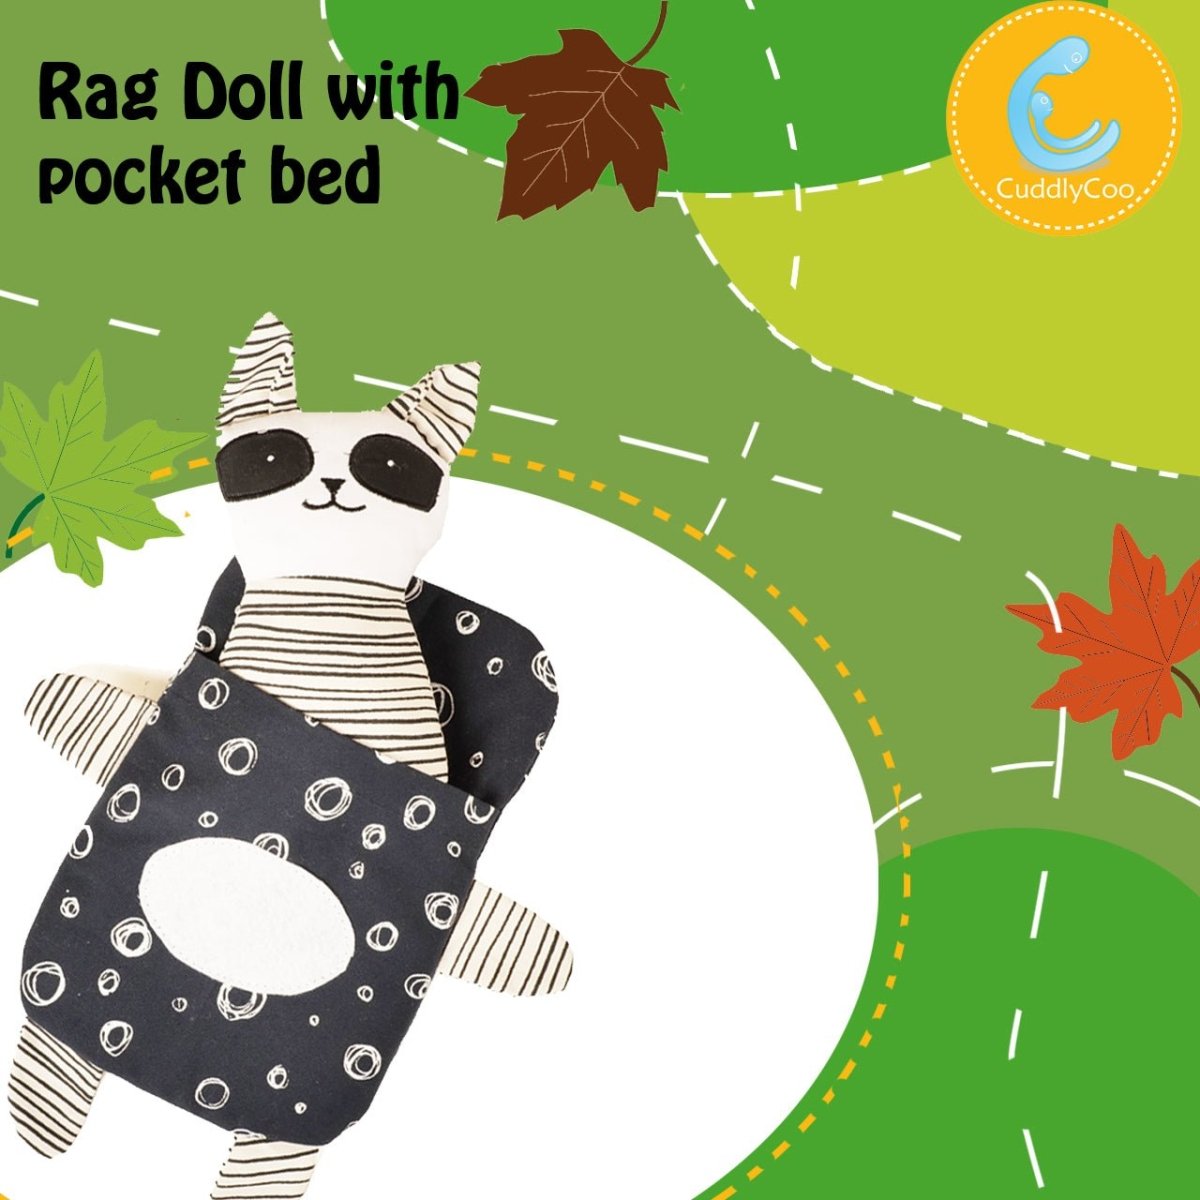 CuddlyCoo Rag Doll With Pocket Bed- Racoon - CCRAGDOLLBEDRACOON